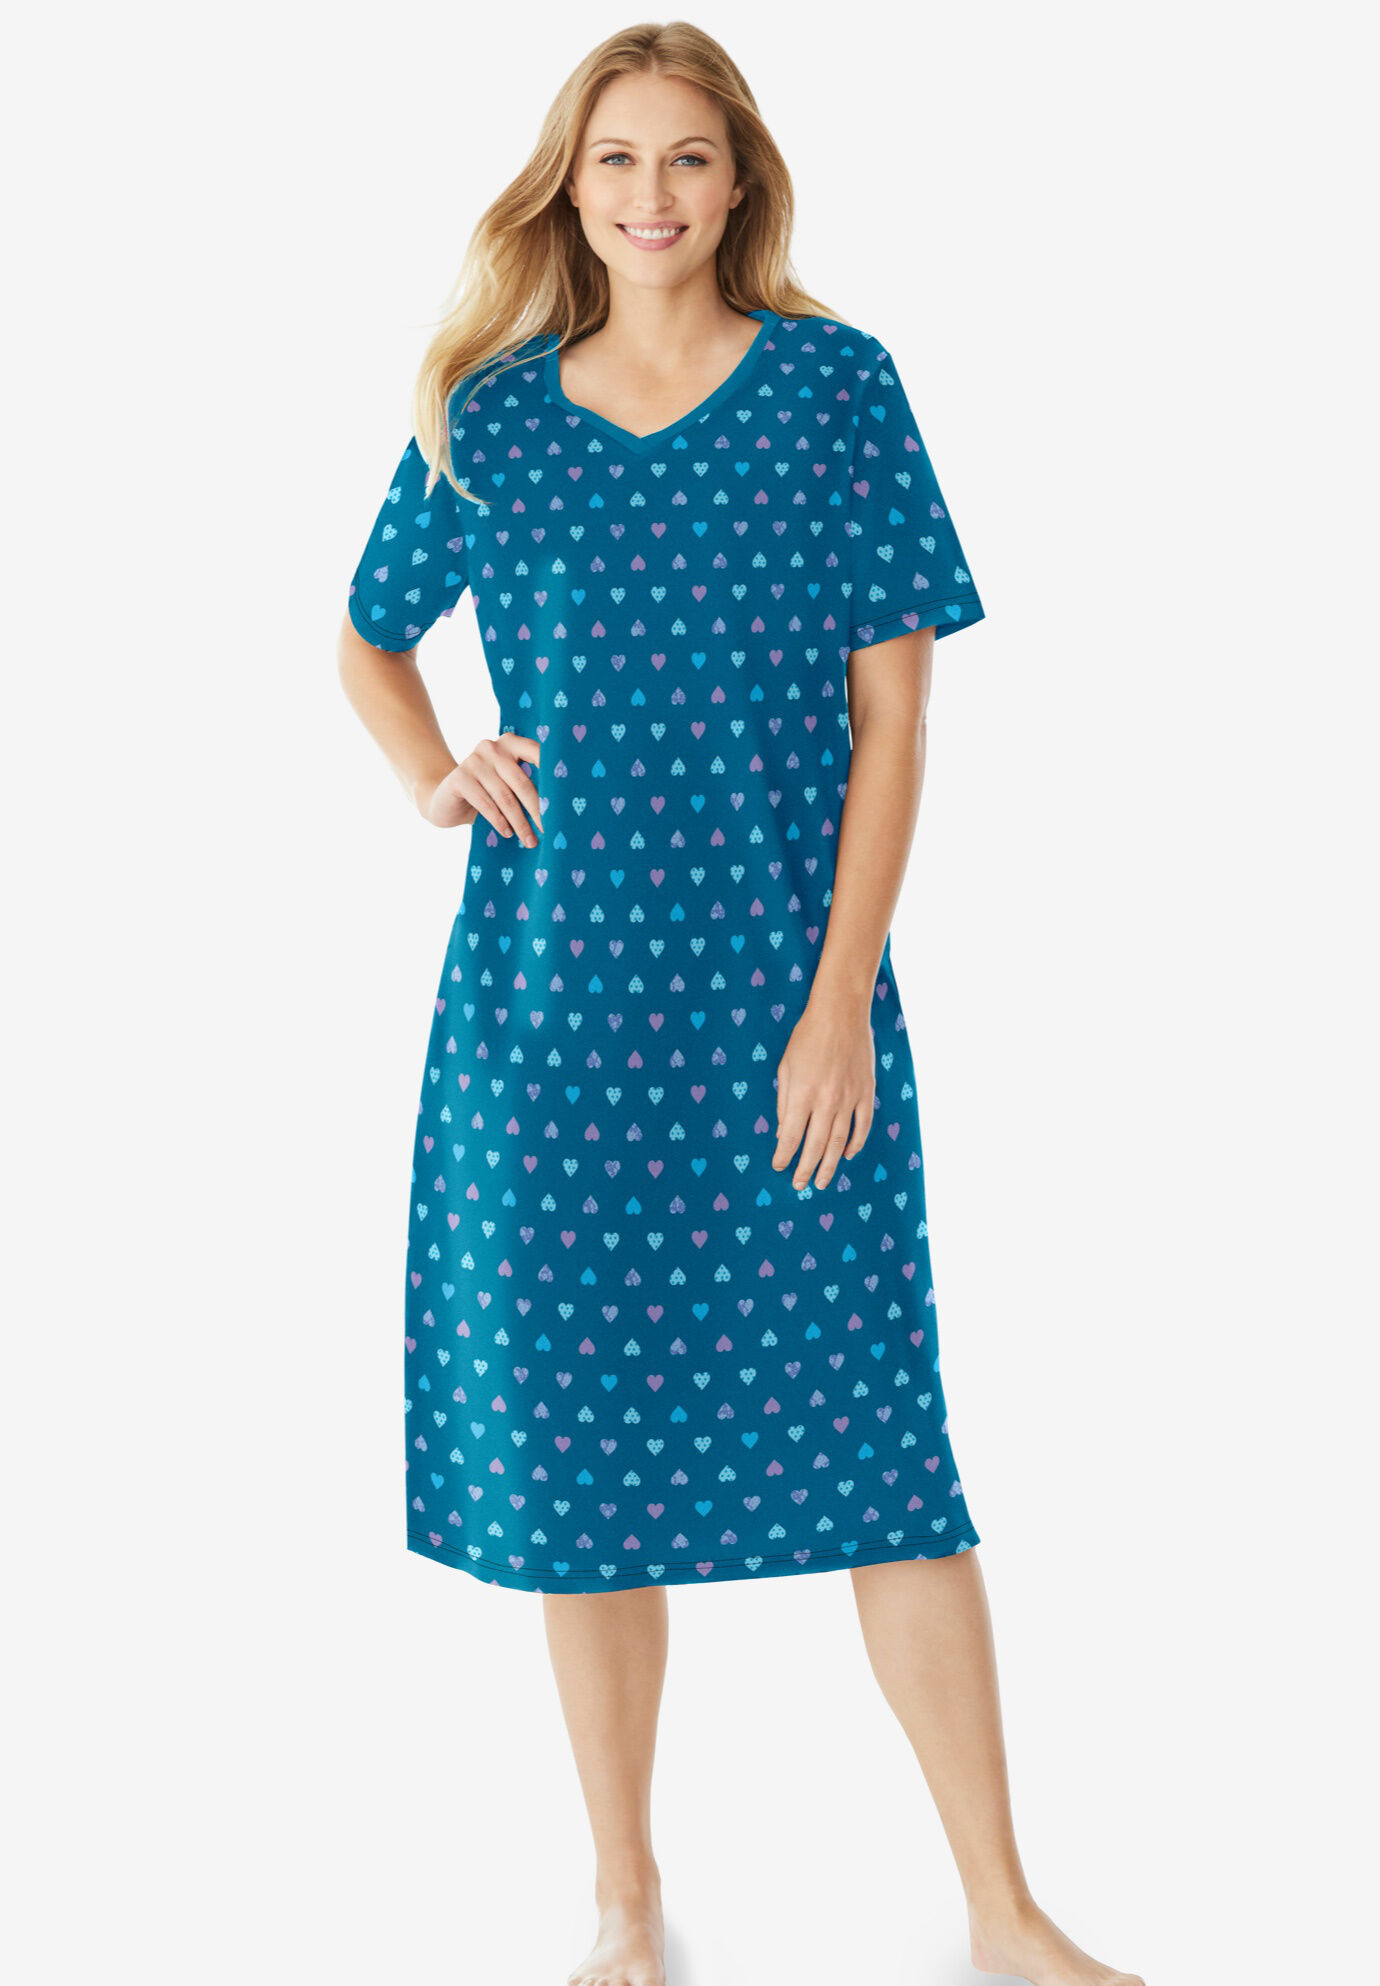 RRP $35.00 EARLY SETTLER SMOOTH PLUS SIZE NIGHTIE 14/16-30/32